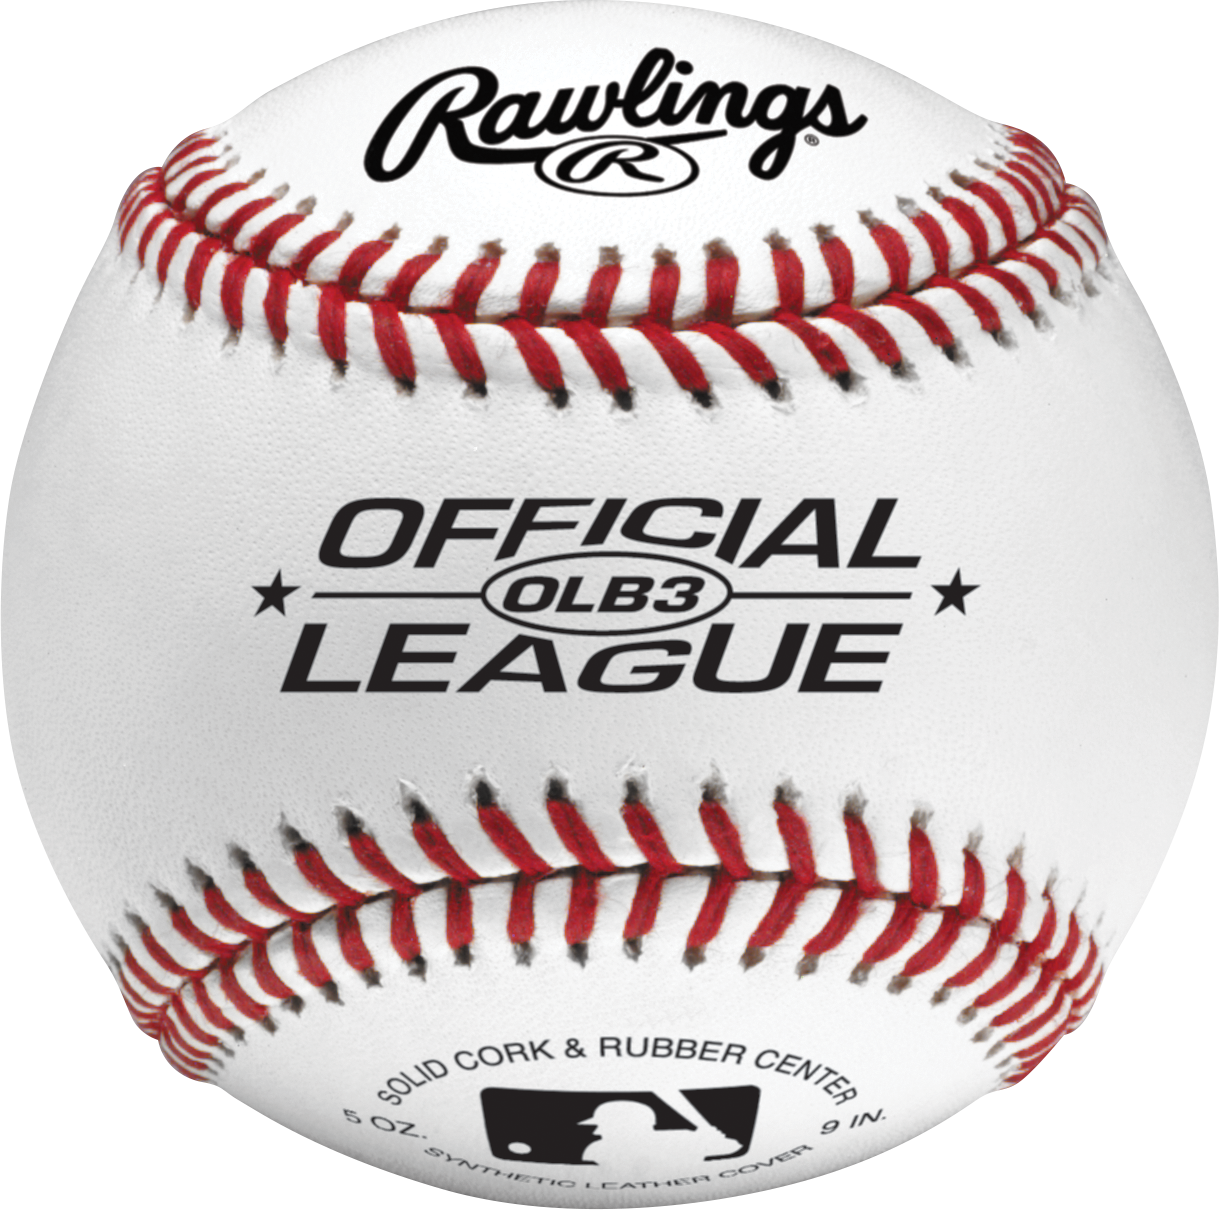 Rawlings 8U Official League OLB3 Practice Youth Baseballs in Mesh Bag, 12 Pieces - image 2 of 10